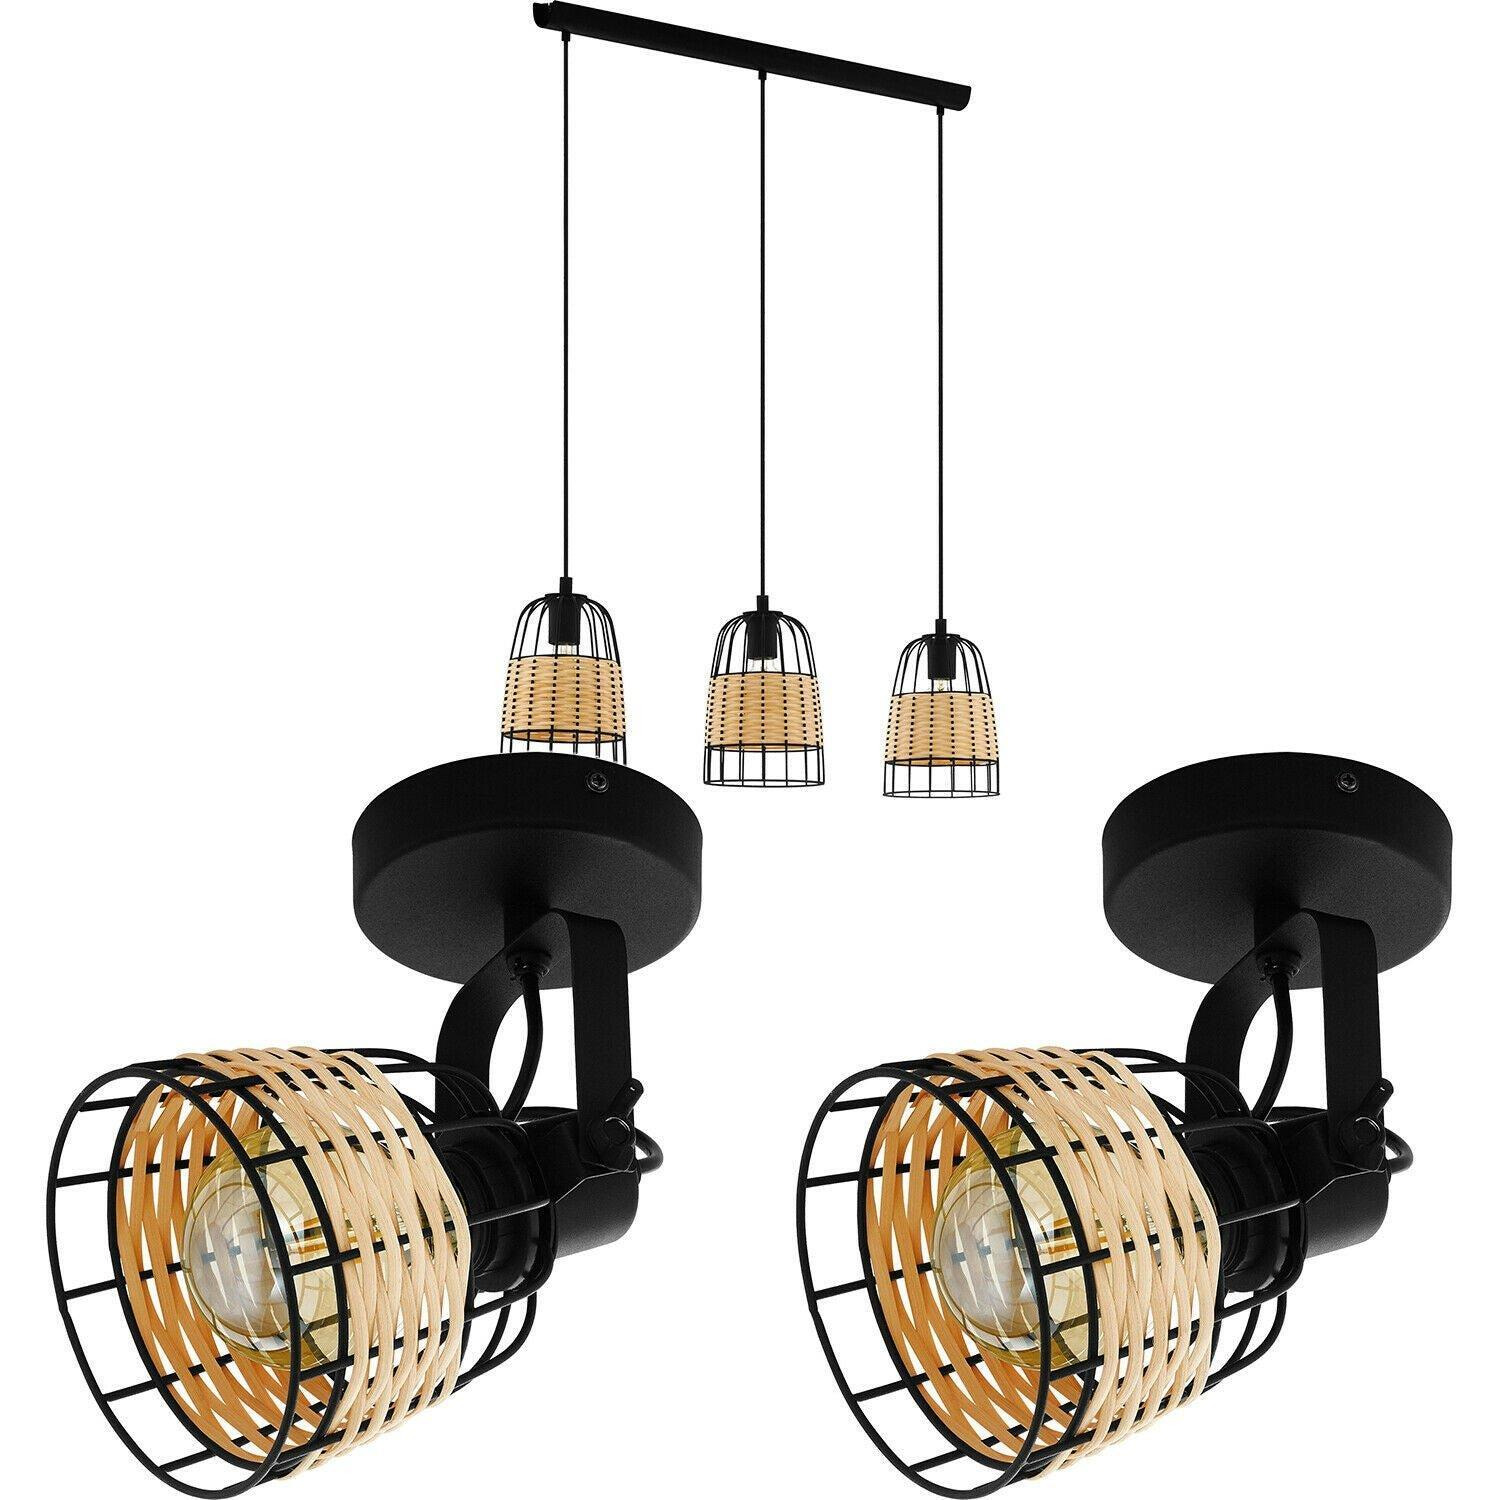 Ceiling Spot Light & 2x Matching Wall Lights Black Wire & Wicker Wood Shade - image 1